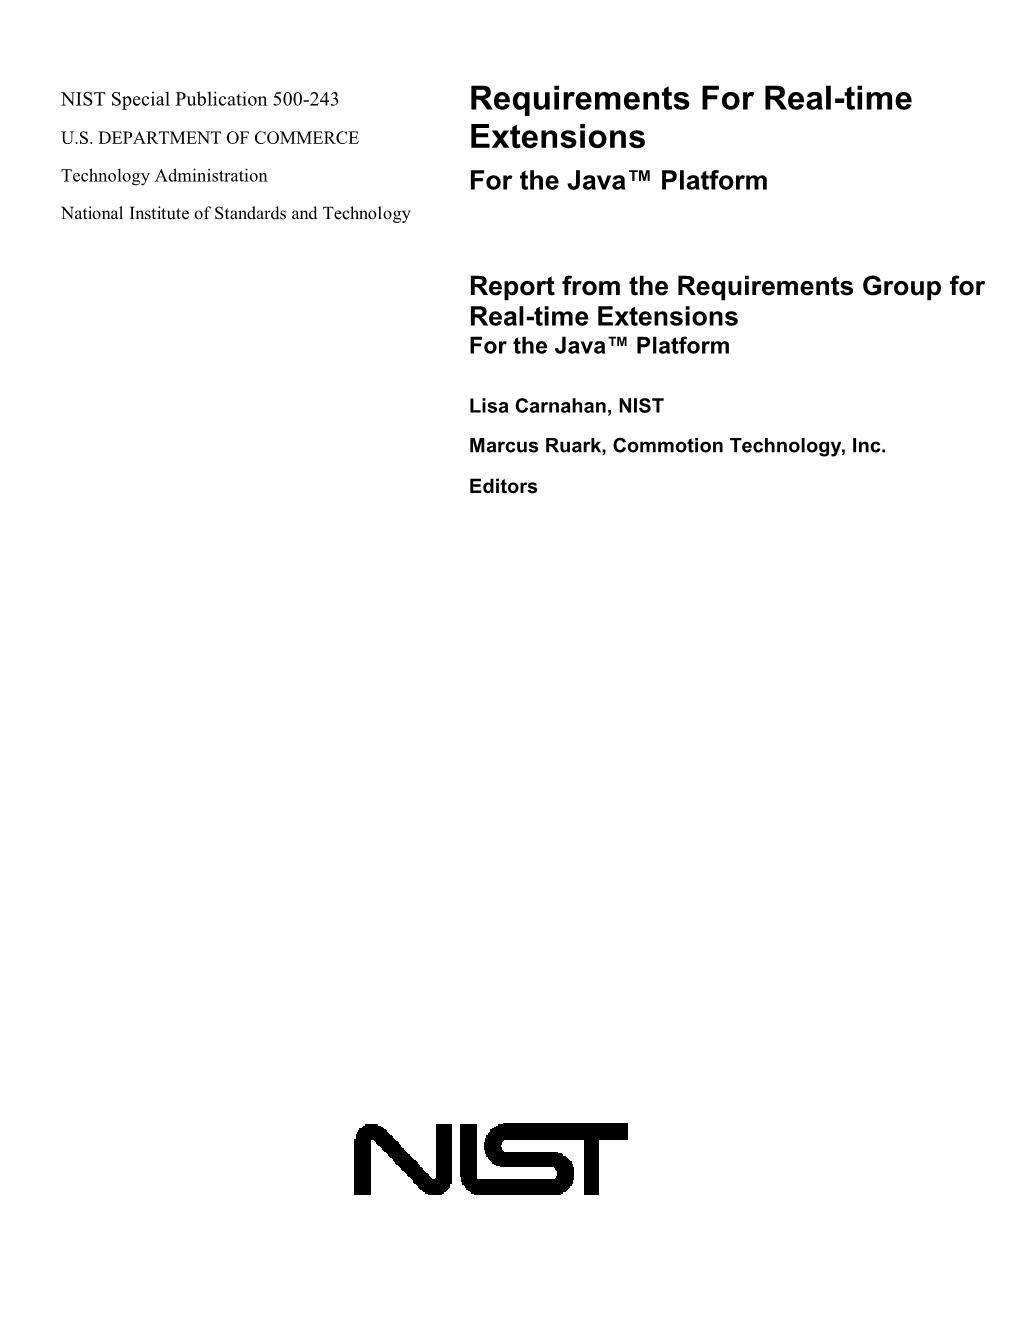 Requirements for Real-Time Extensions NIST Special Publication XXX-XX for the Java™ Platform